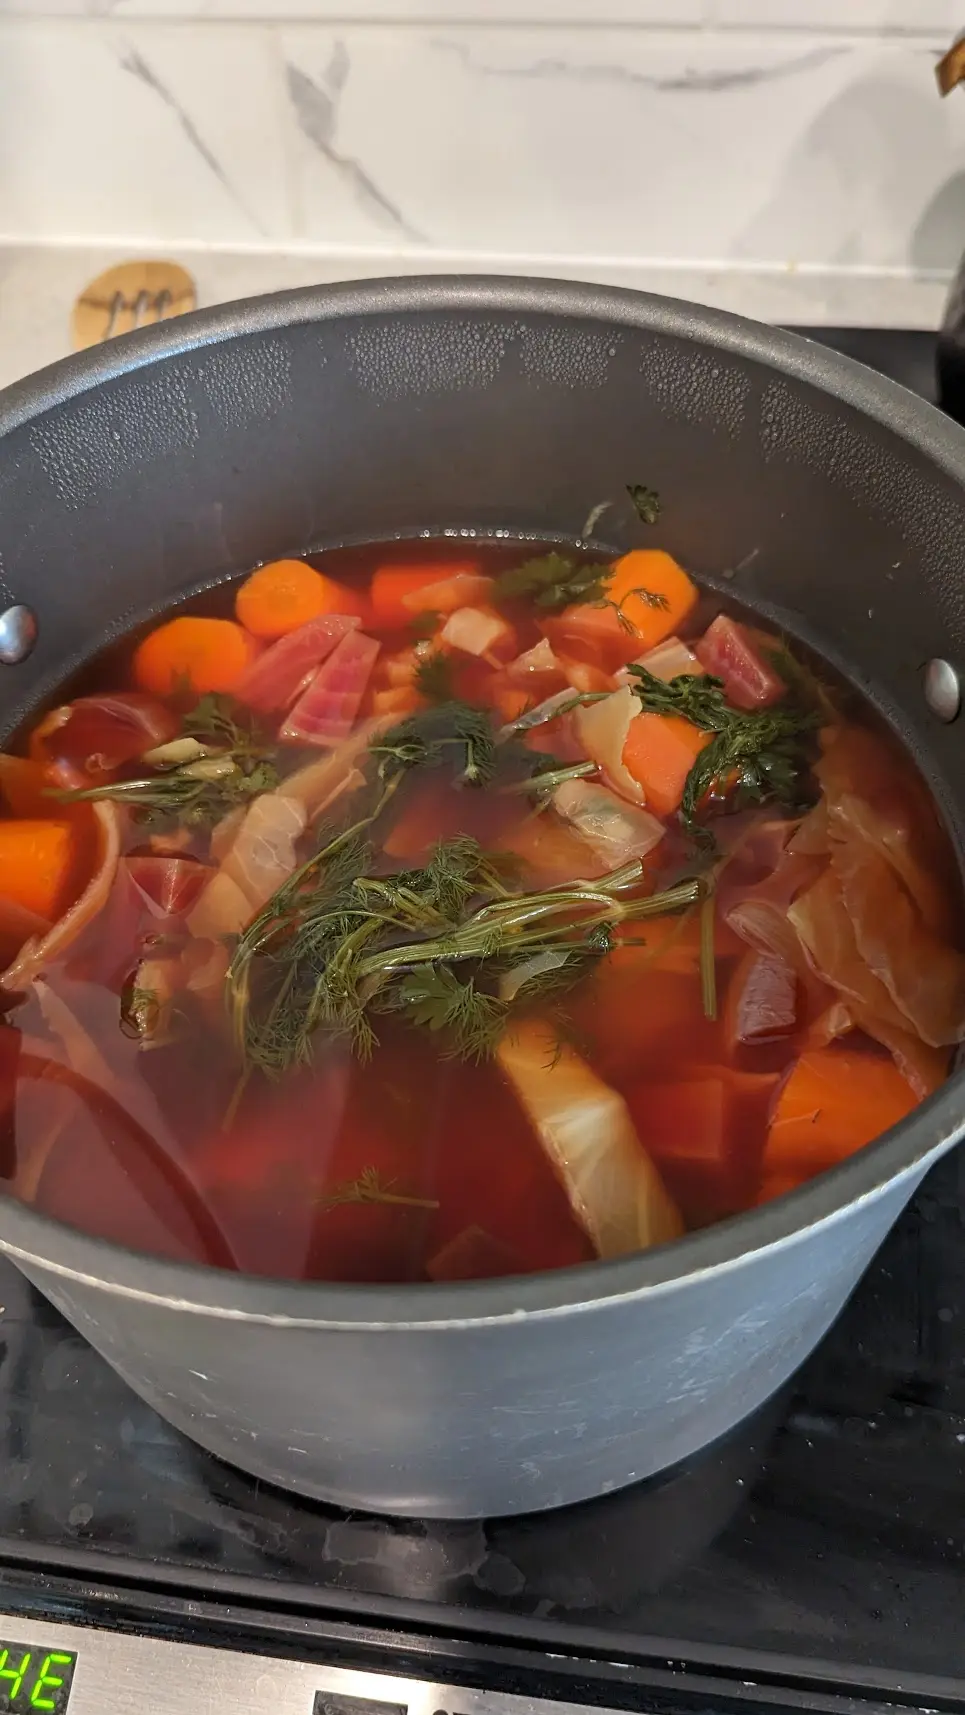 Vegetable broth. First day only drink broth, second day you can have some of the vegetables.